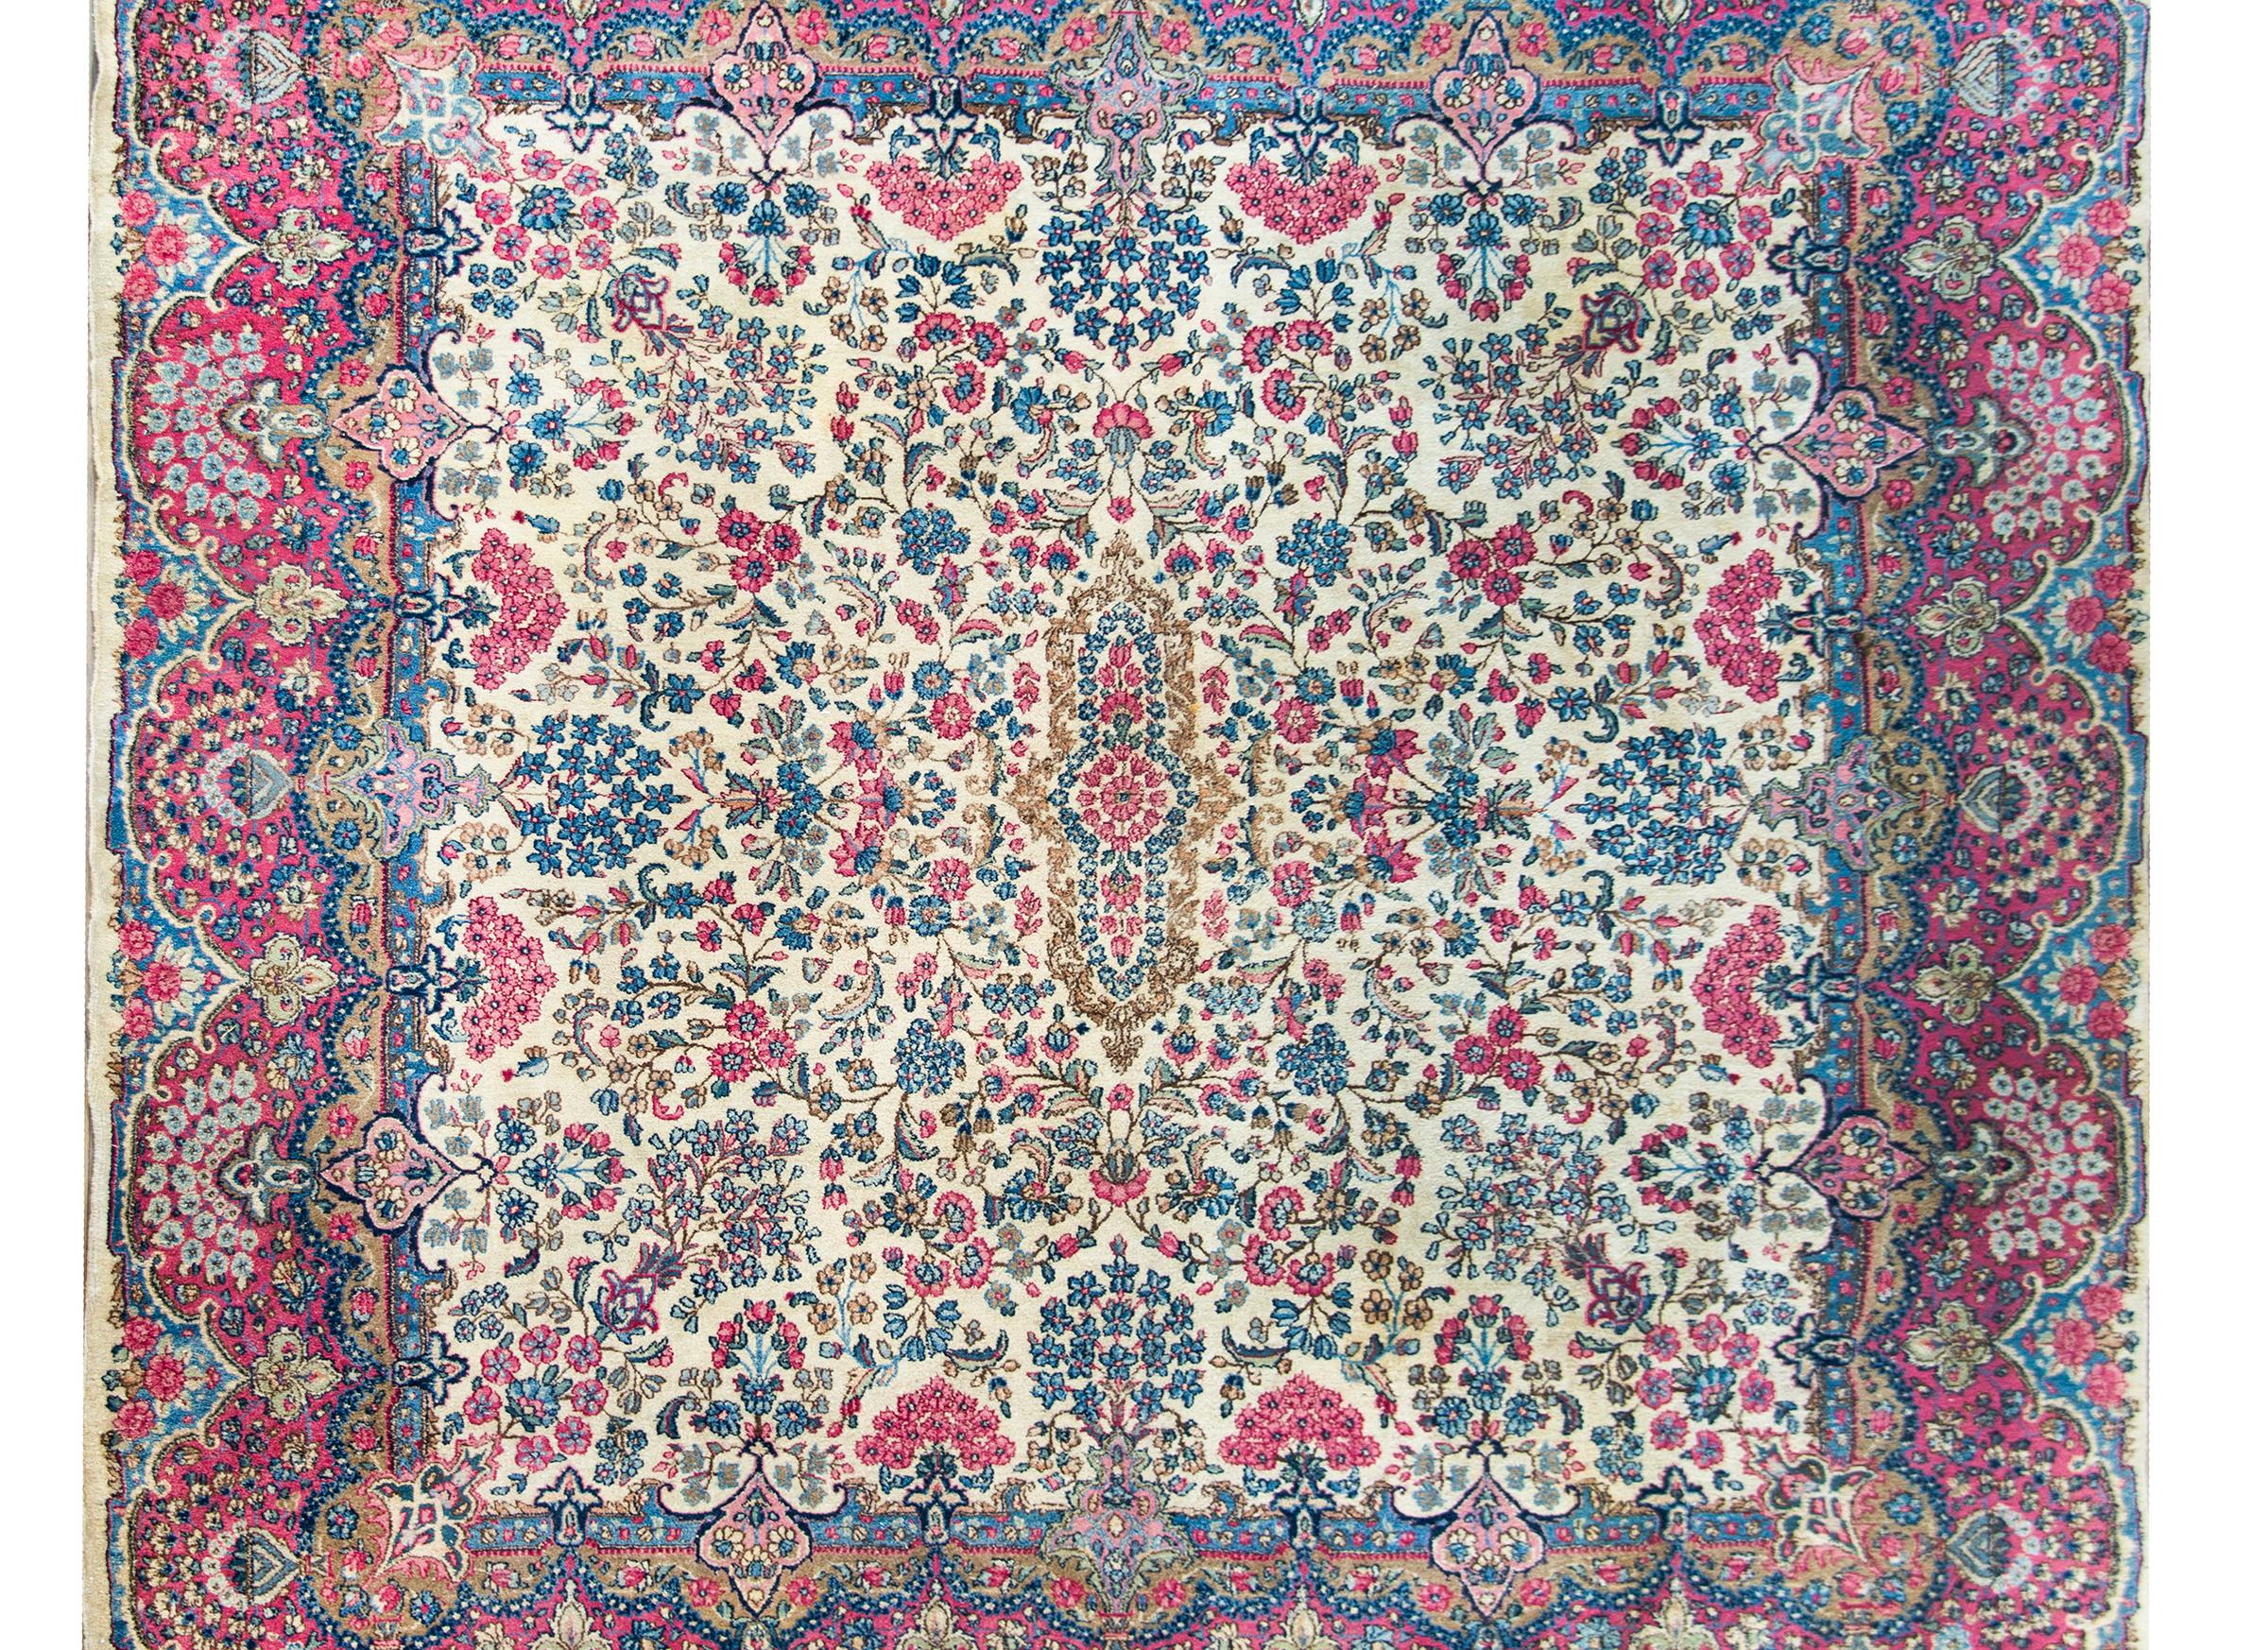 A stunning early 20th century Persian Kirman rug with a beautiful mirrored floral pattern containing myriad floral clusters woven in pinks, indigos, and greens, and set against a cream colors background, and all framed by a wide floral pattered